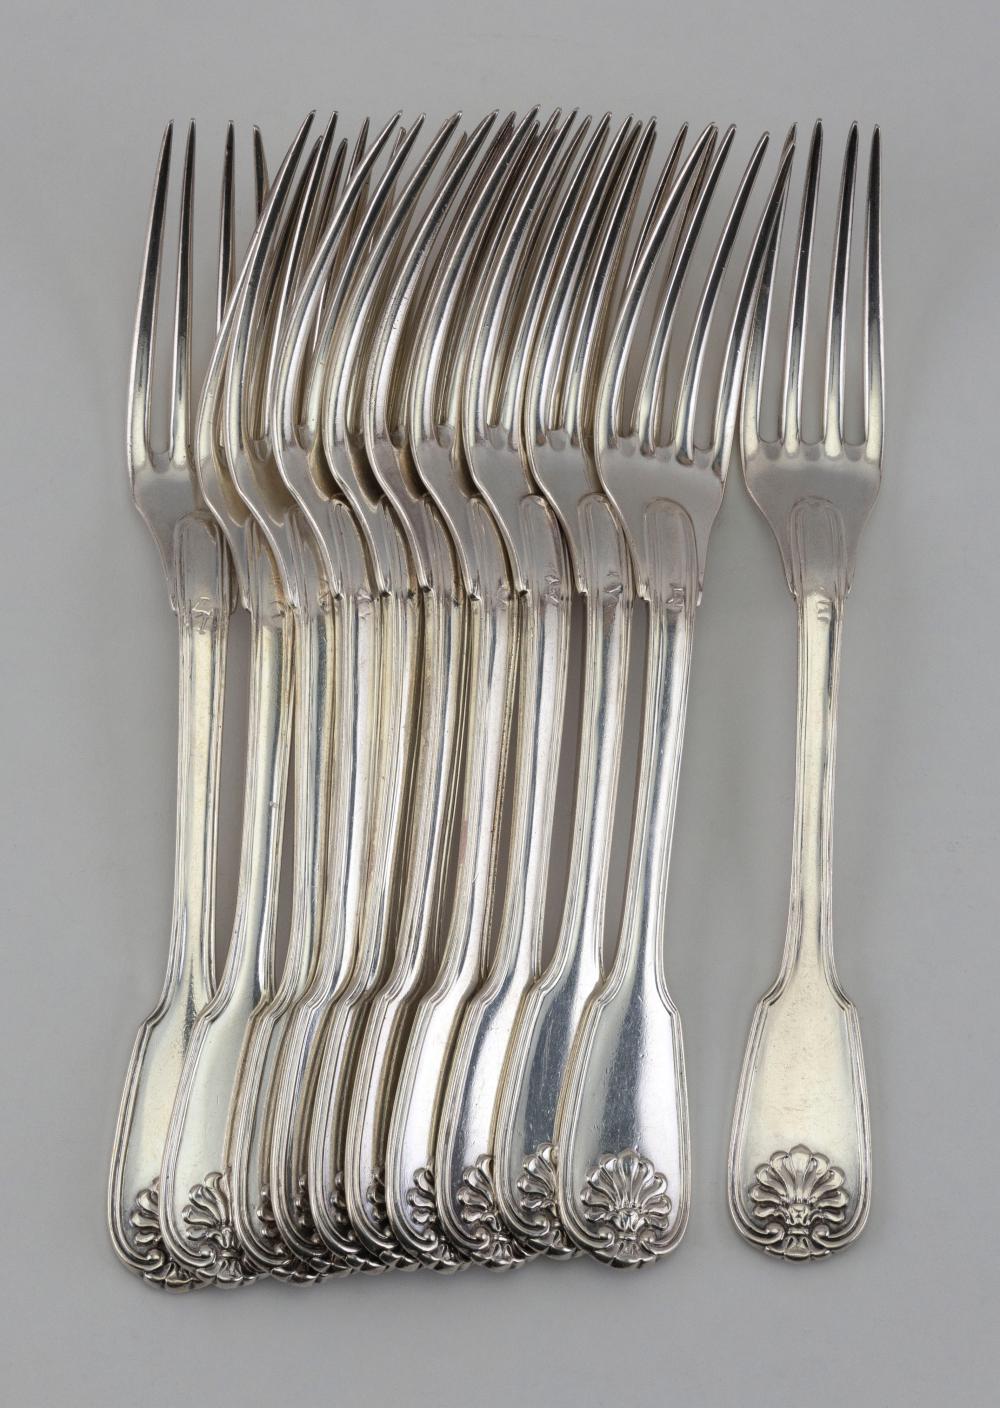 ELEVEN FRENCH STERLING SILVER FORKS 34d1fc